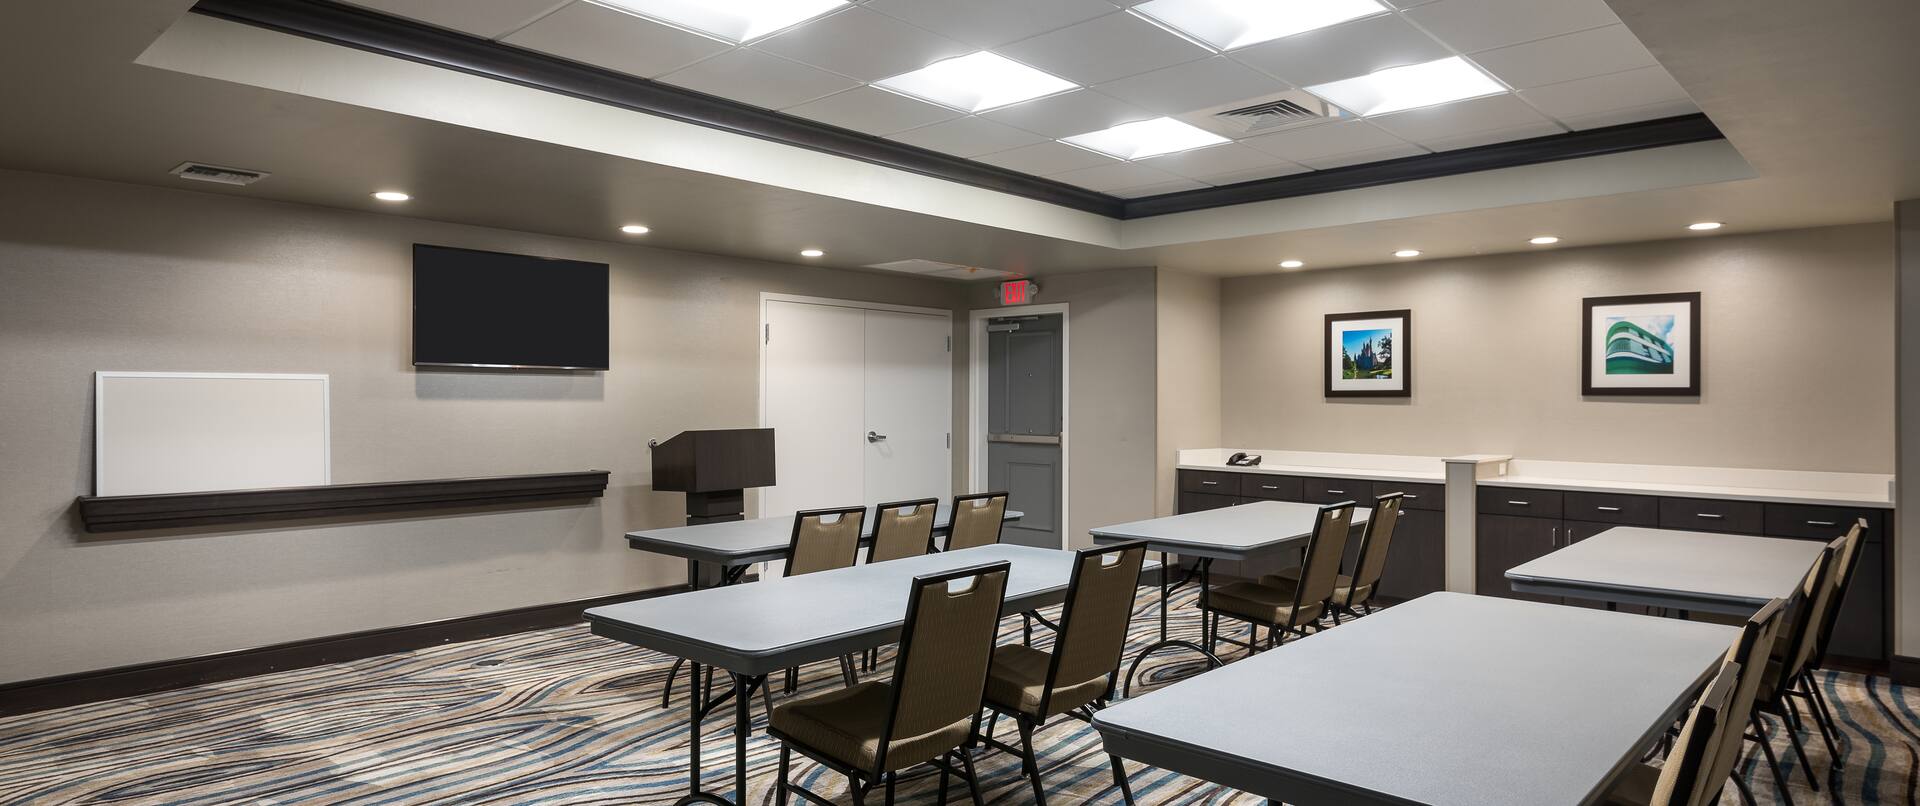 Meeting Room Classroom with Wall Mounted HDTV